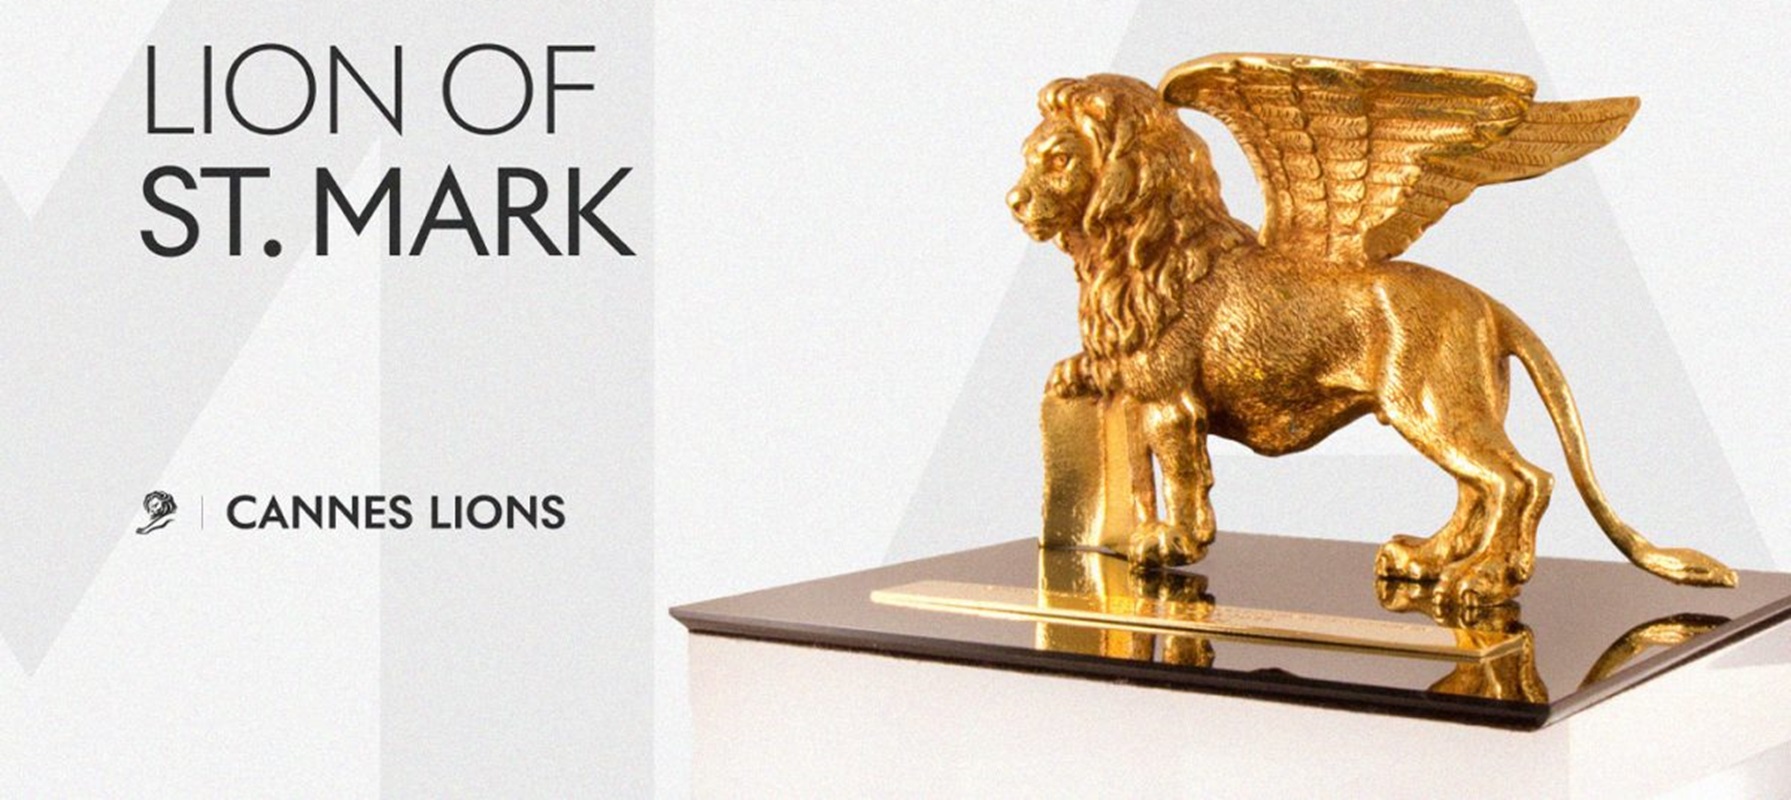 Cannes Lions to honour French advertising veteran Jacques Séguéla with Lion of St Mark award